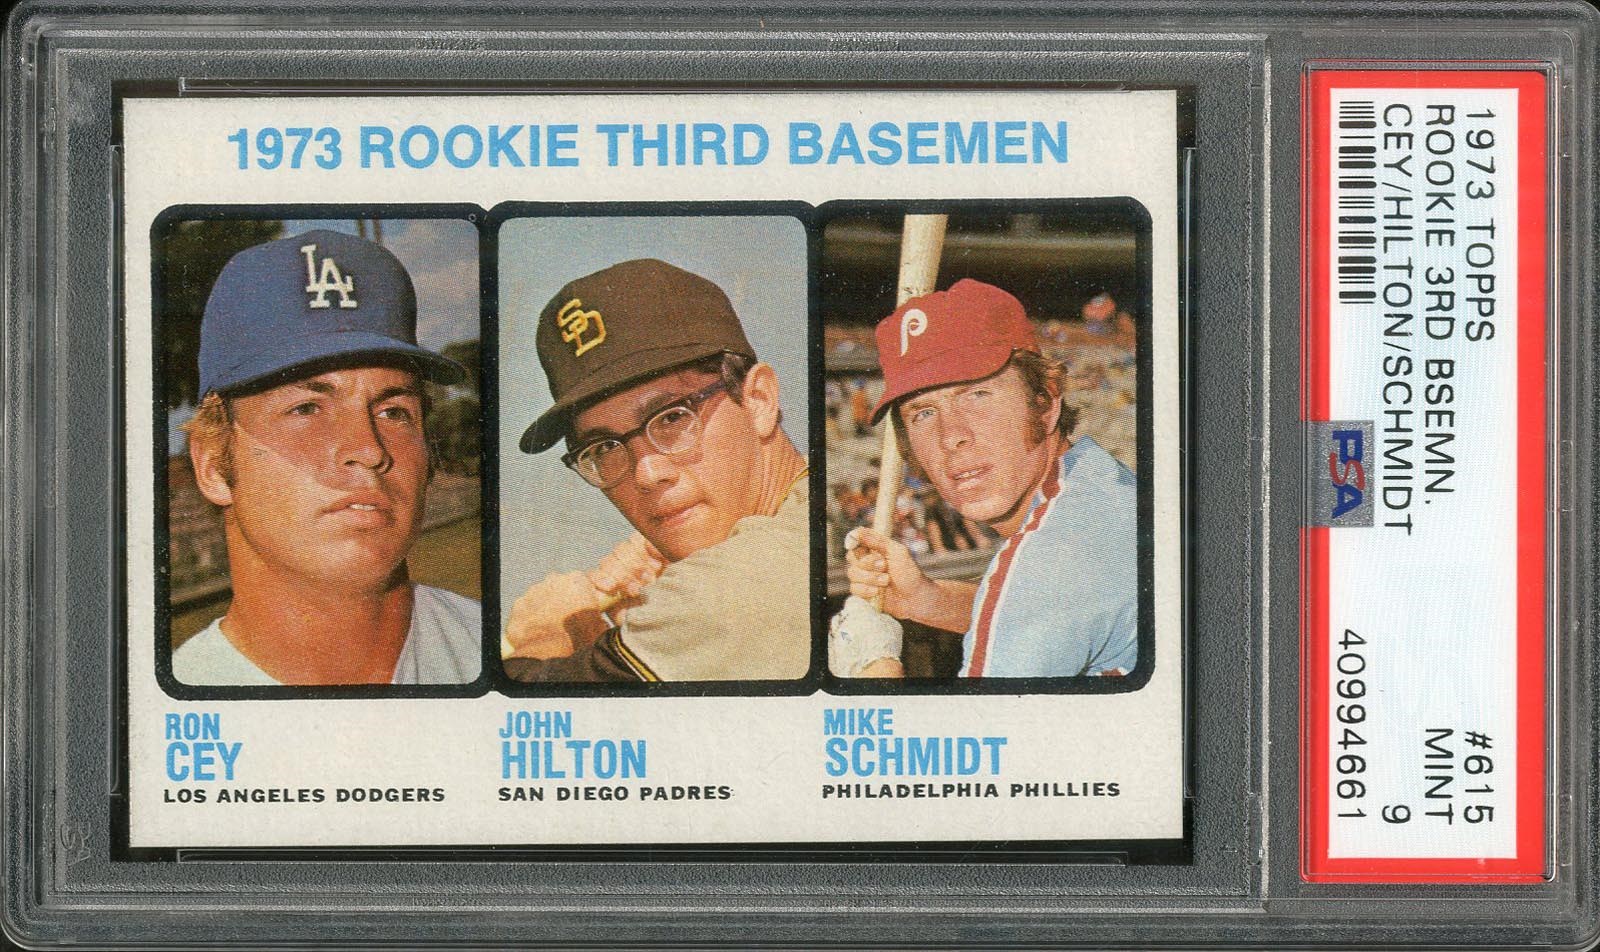 Baseball and Trading Cards - 1973 Topps #615 Mike Schmidt Rookie (PSA MINT 9)